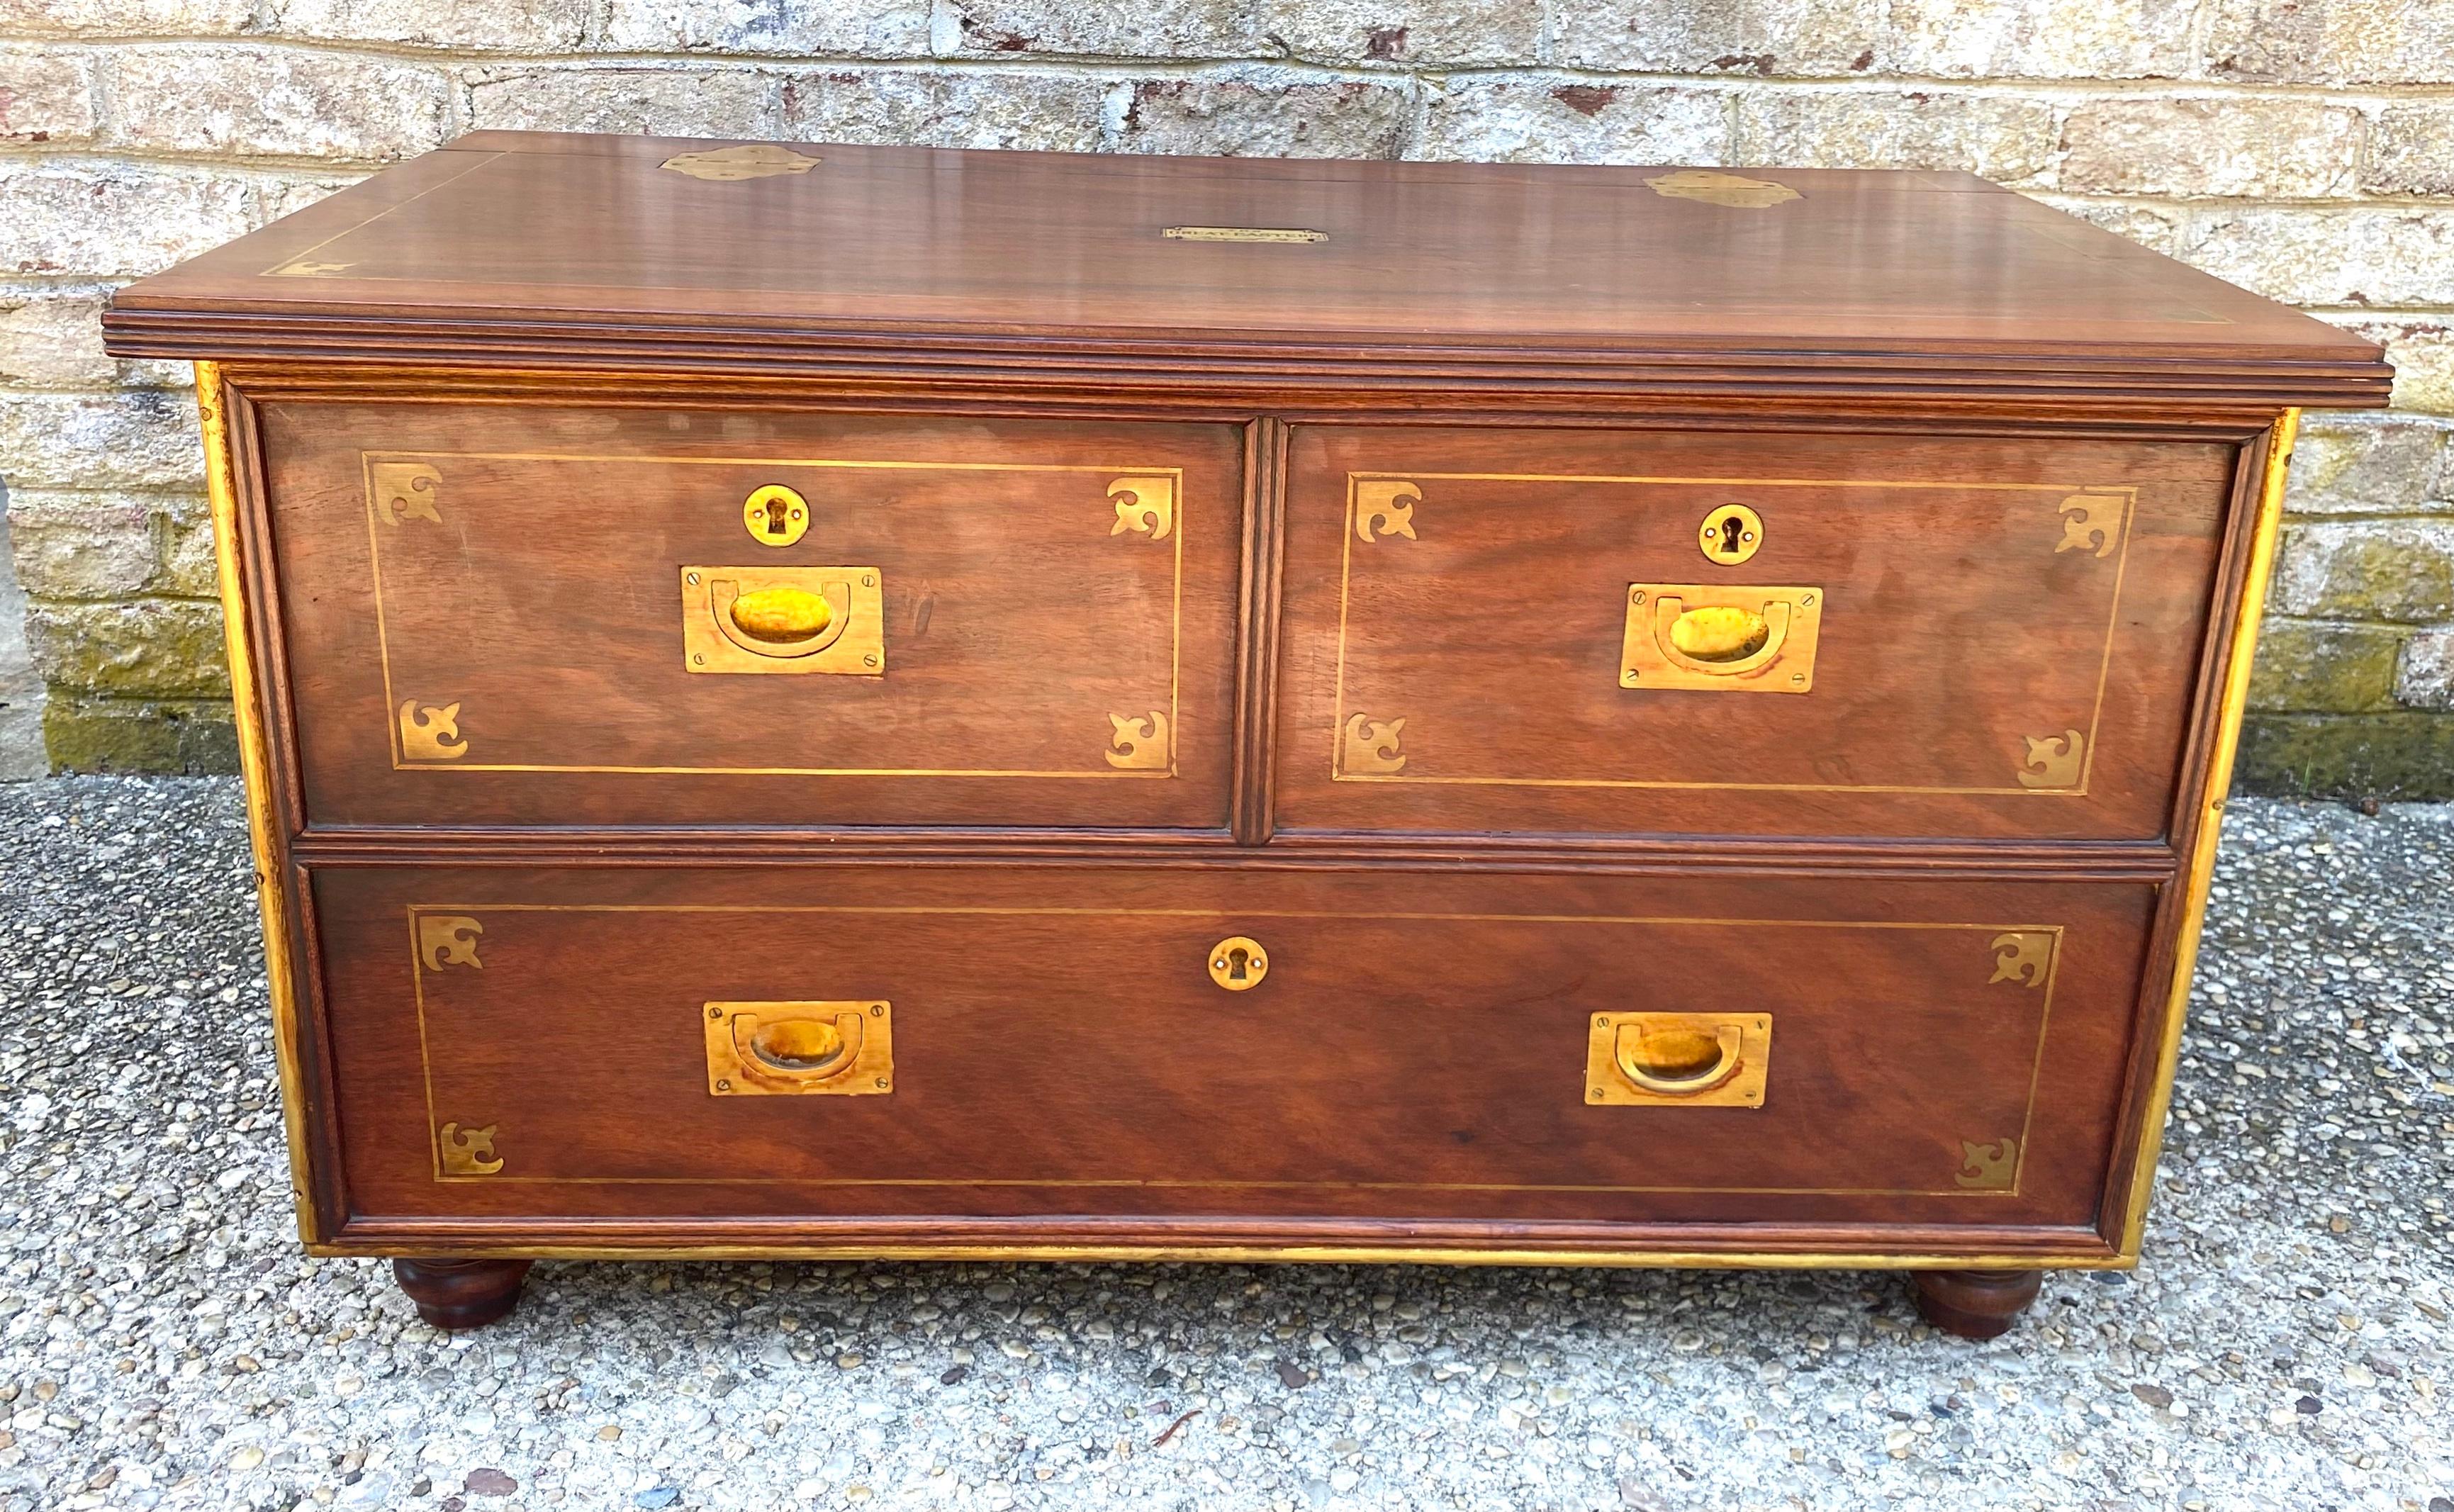 Lovely antique trunks or blanket chests with brass hardware and handles all intact..... a wonderful nautical moment..... sold separately or together but price individually ($2800/each list)....